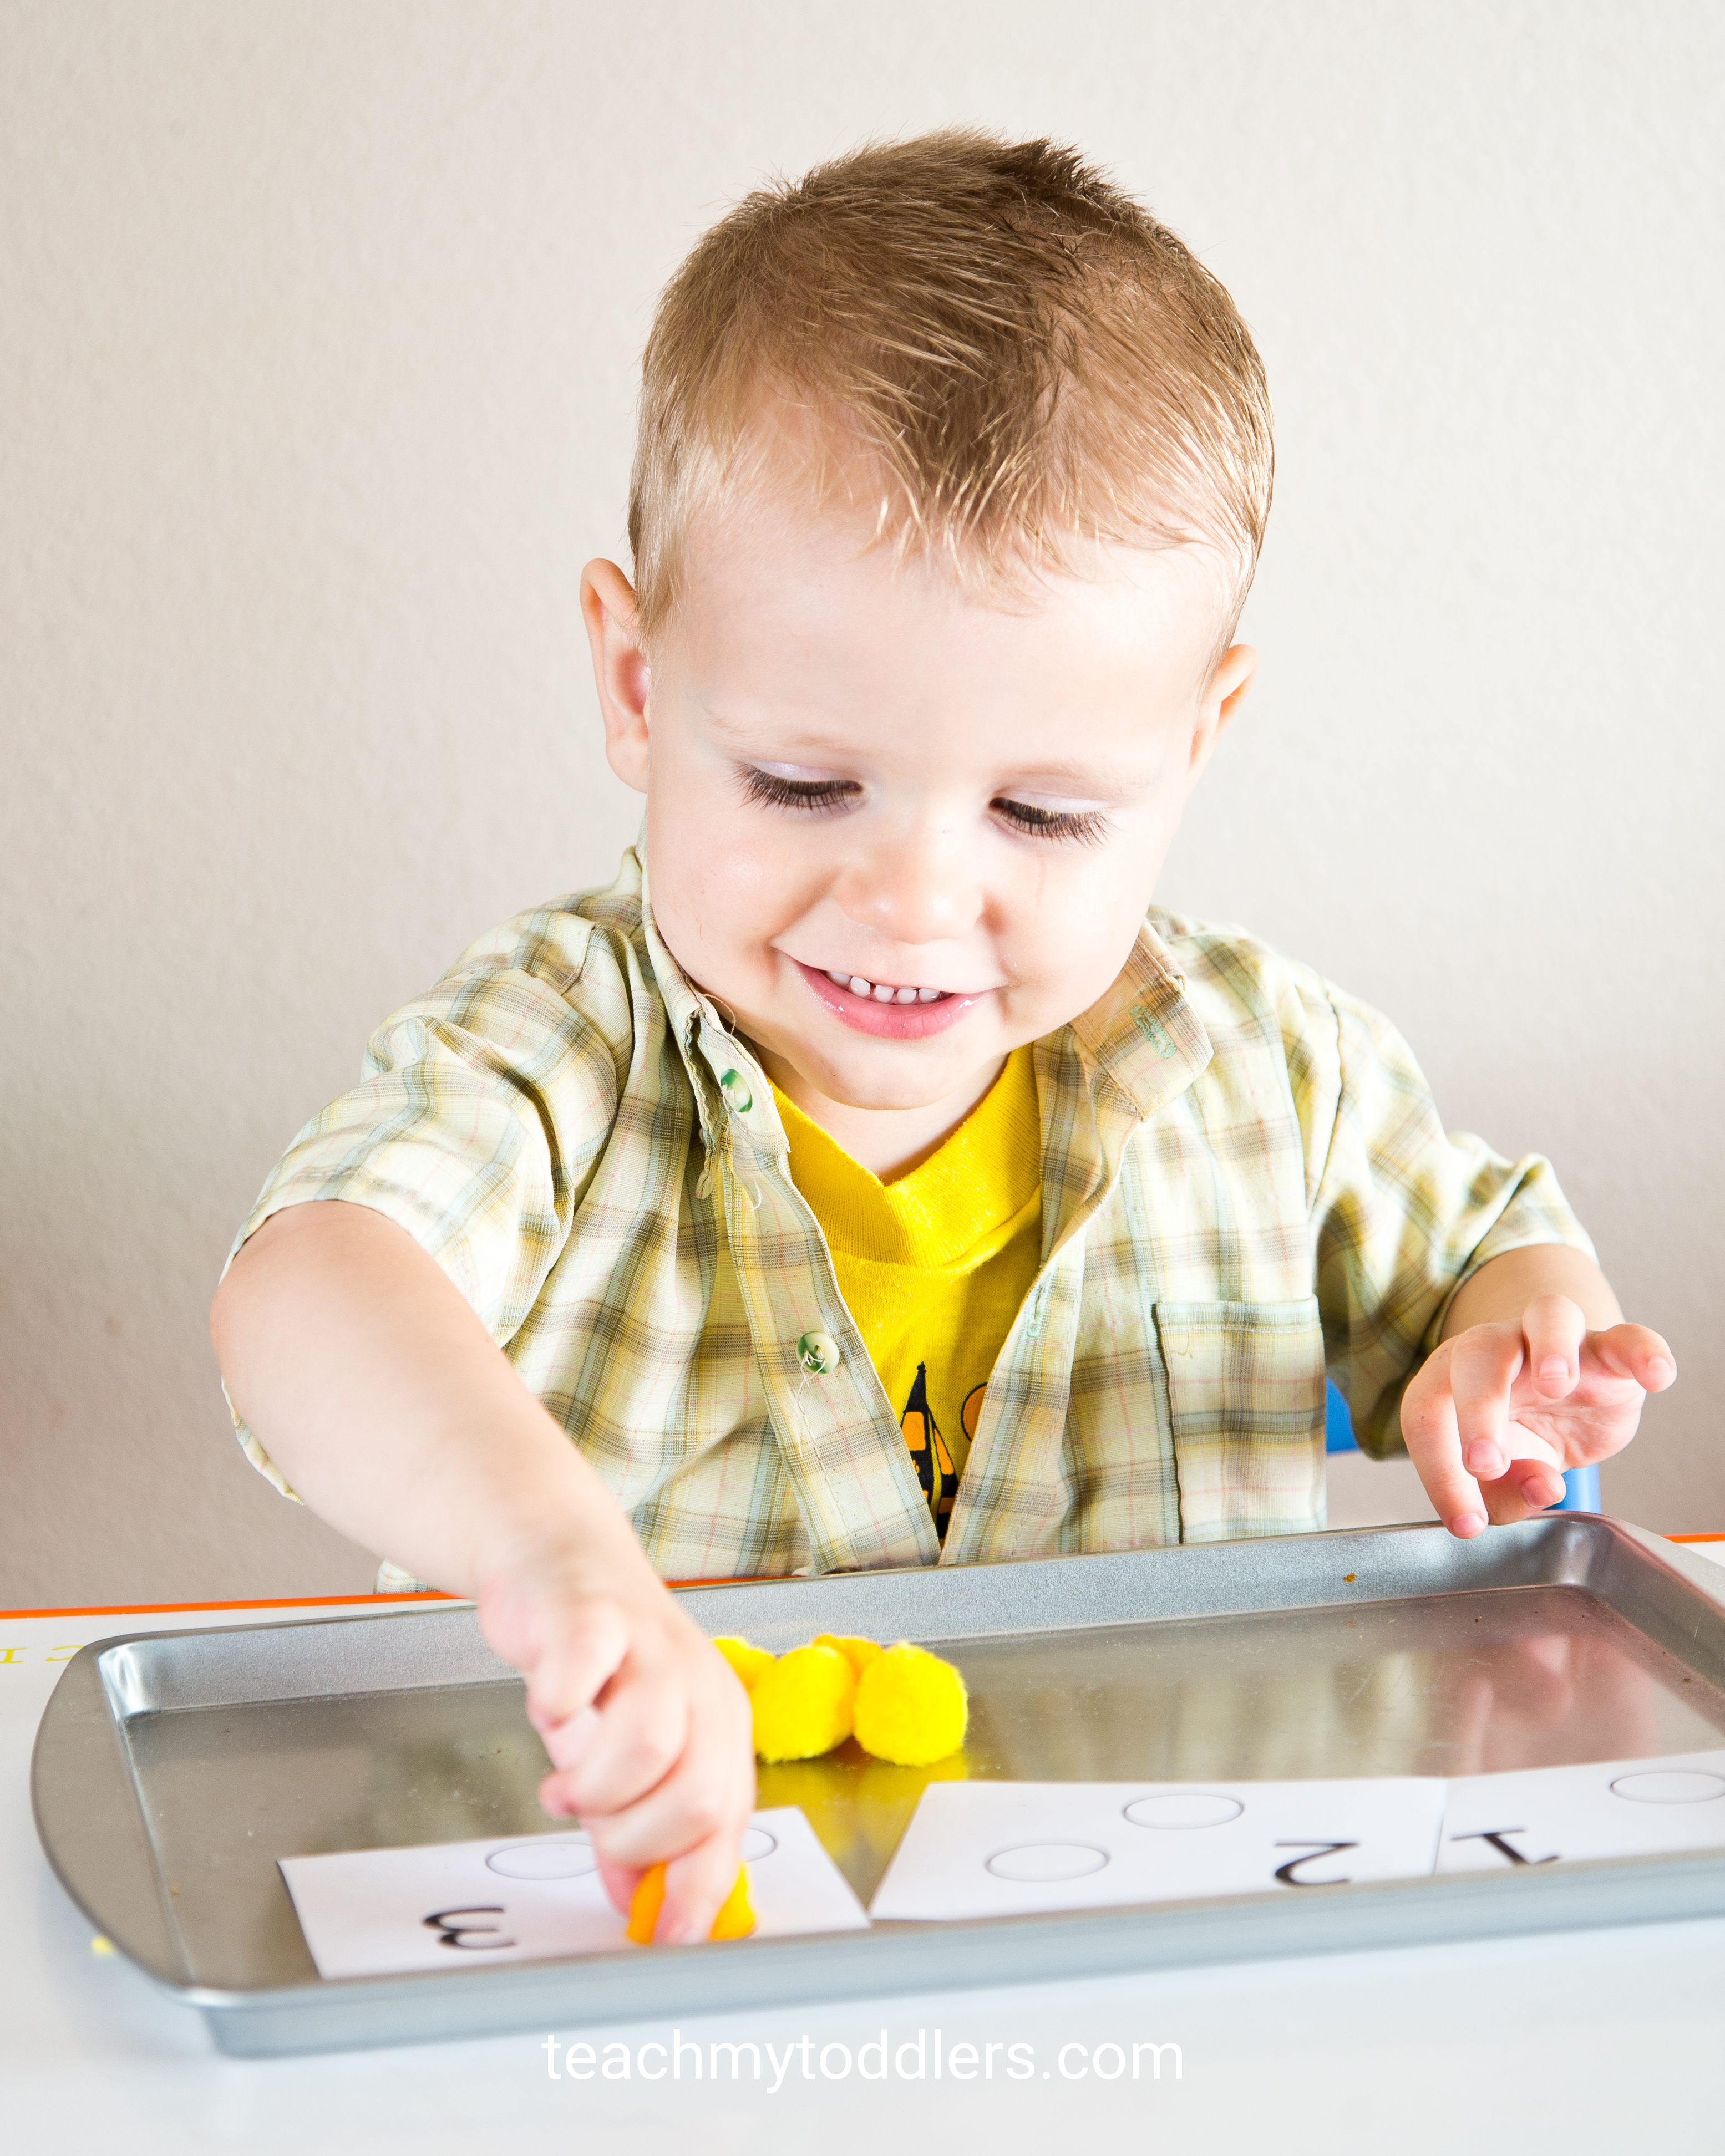 Find out how to use these counting activities to teach toddlers numbers